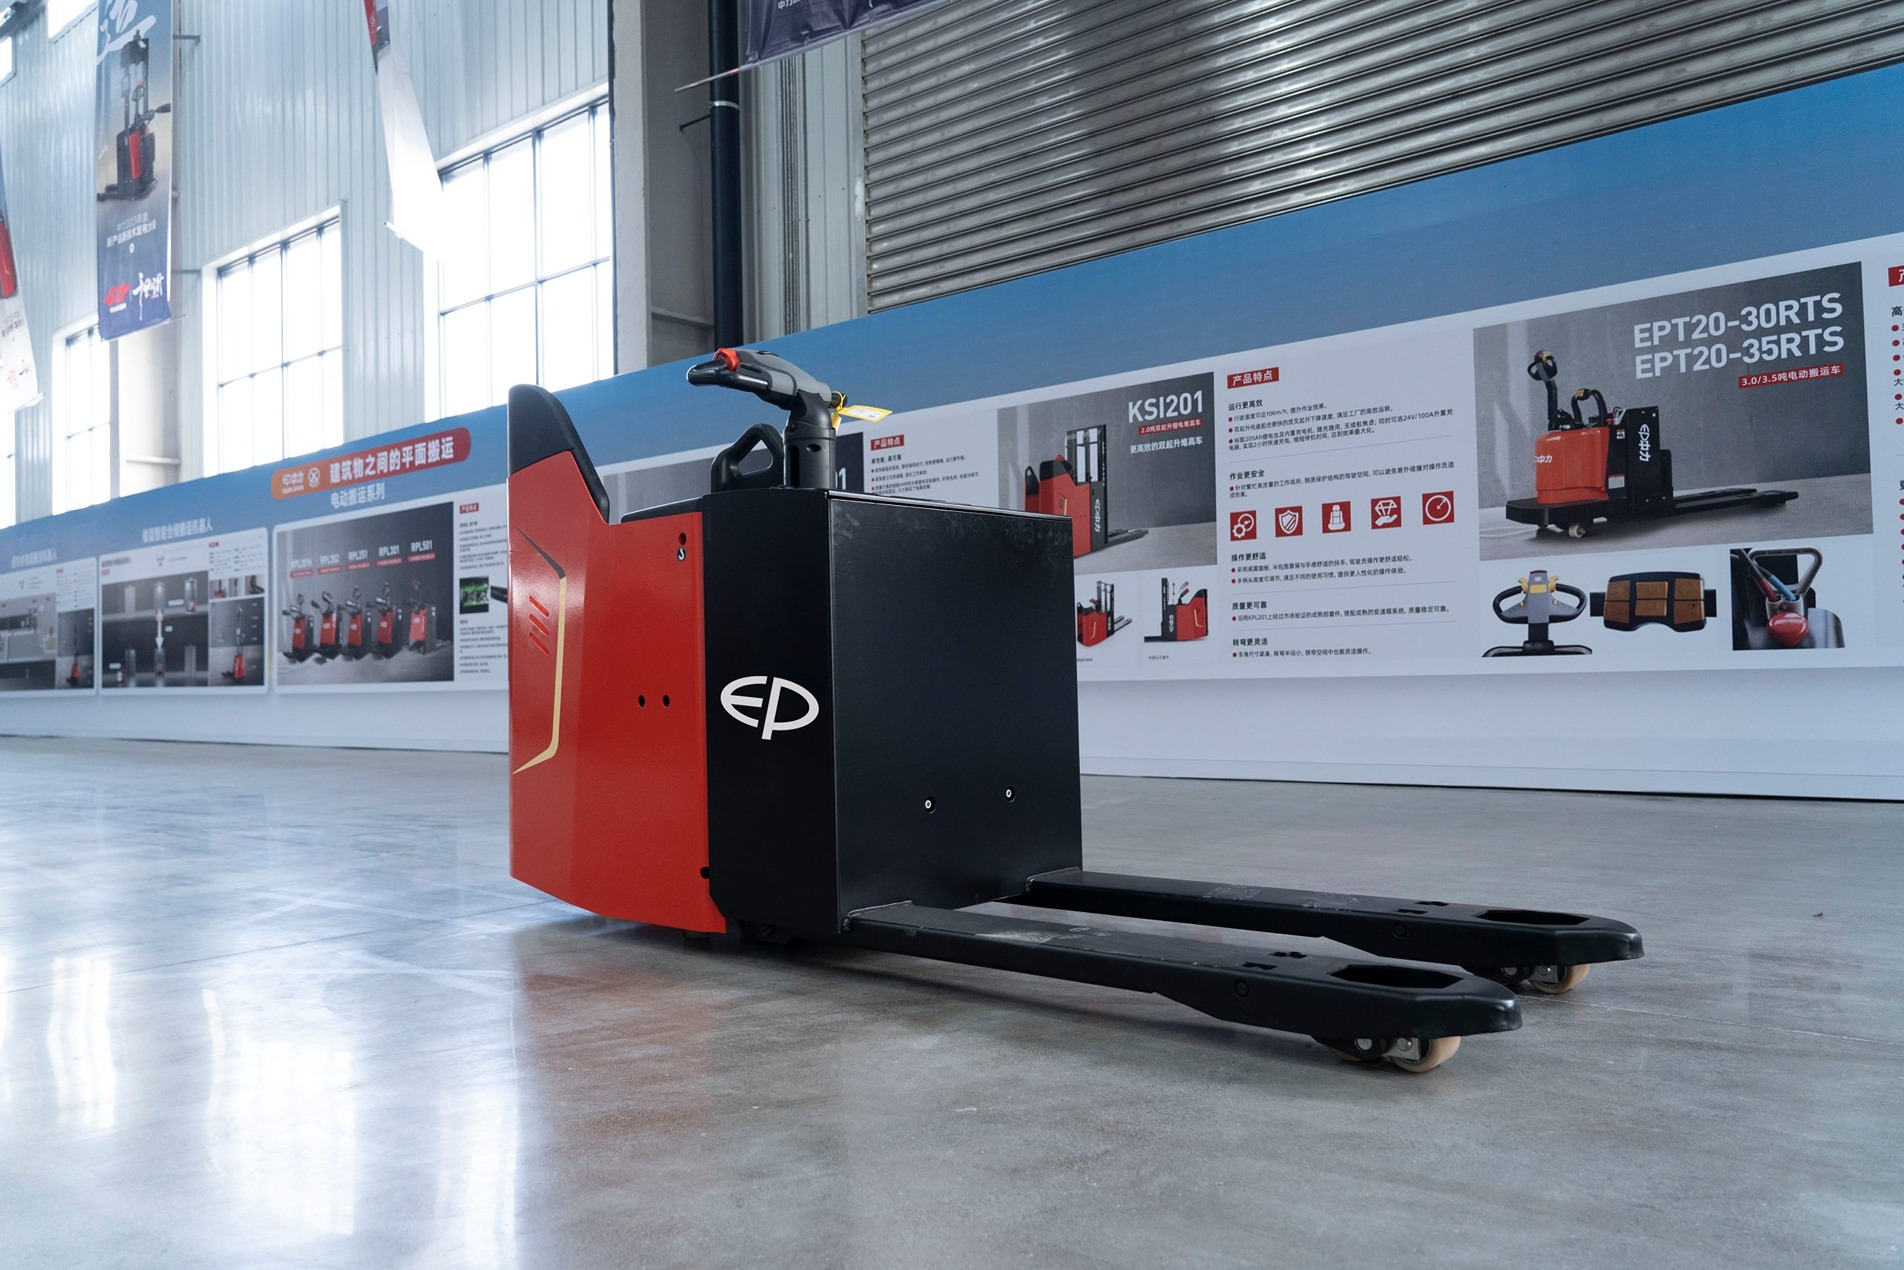 KPL201 electric pallet truck being used in a warehouse.